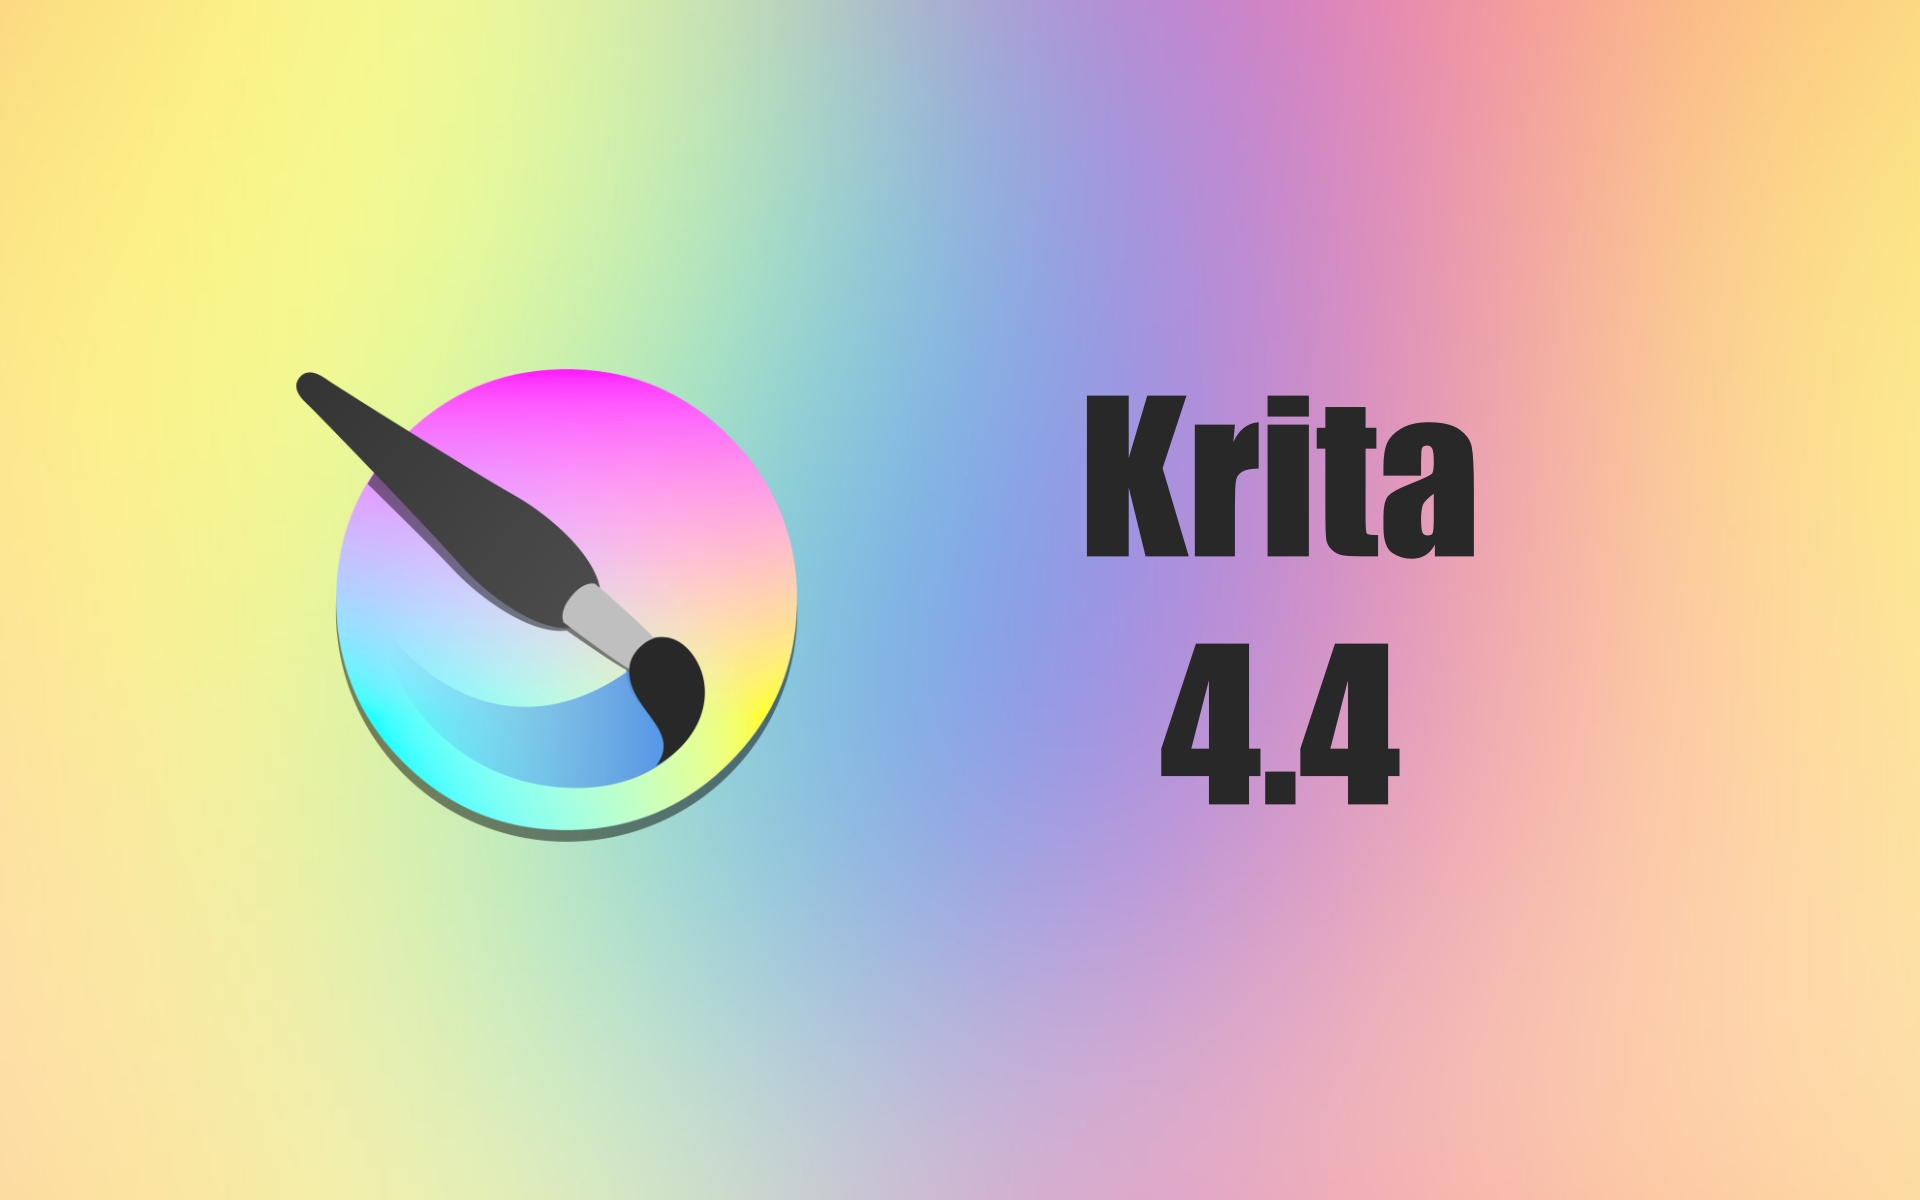 Krita 4.4 Released with Major Updates to Fill Layers, New Brush Options